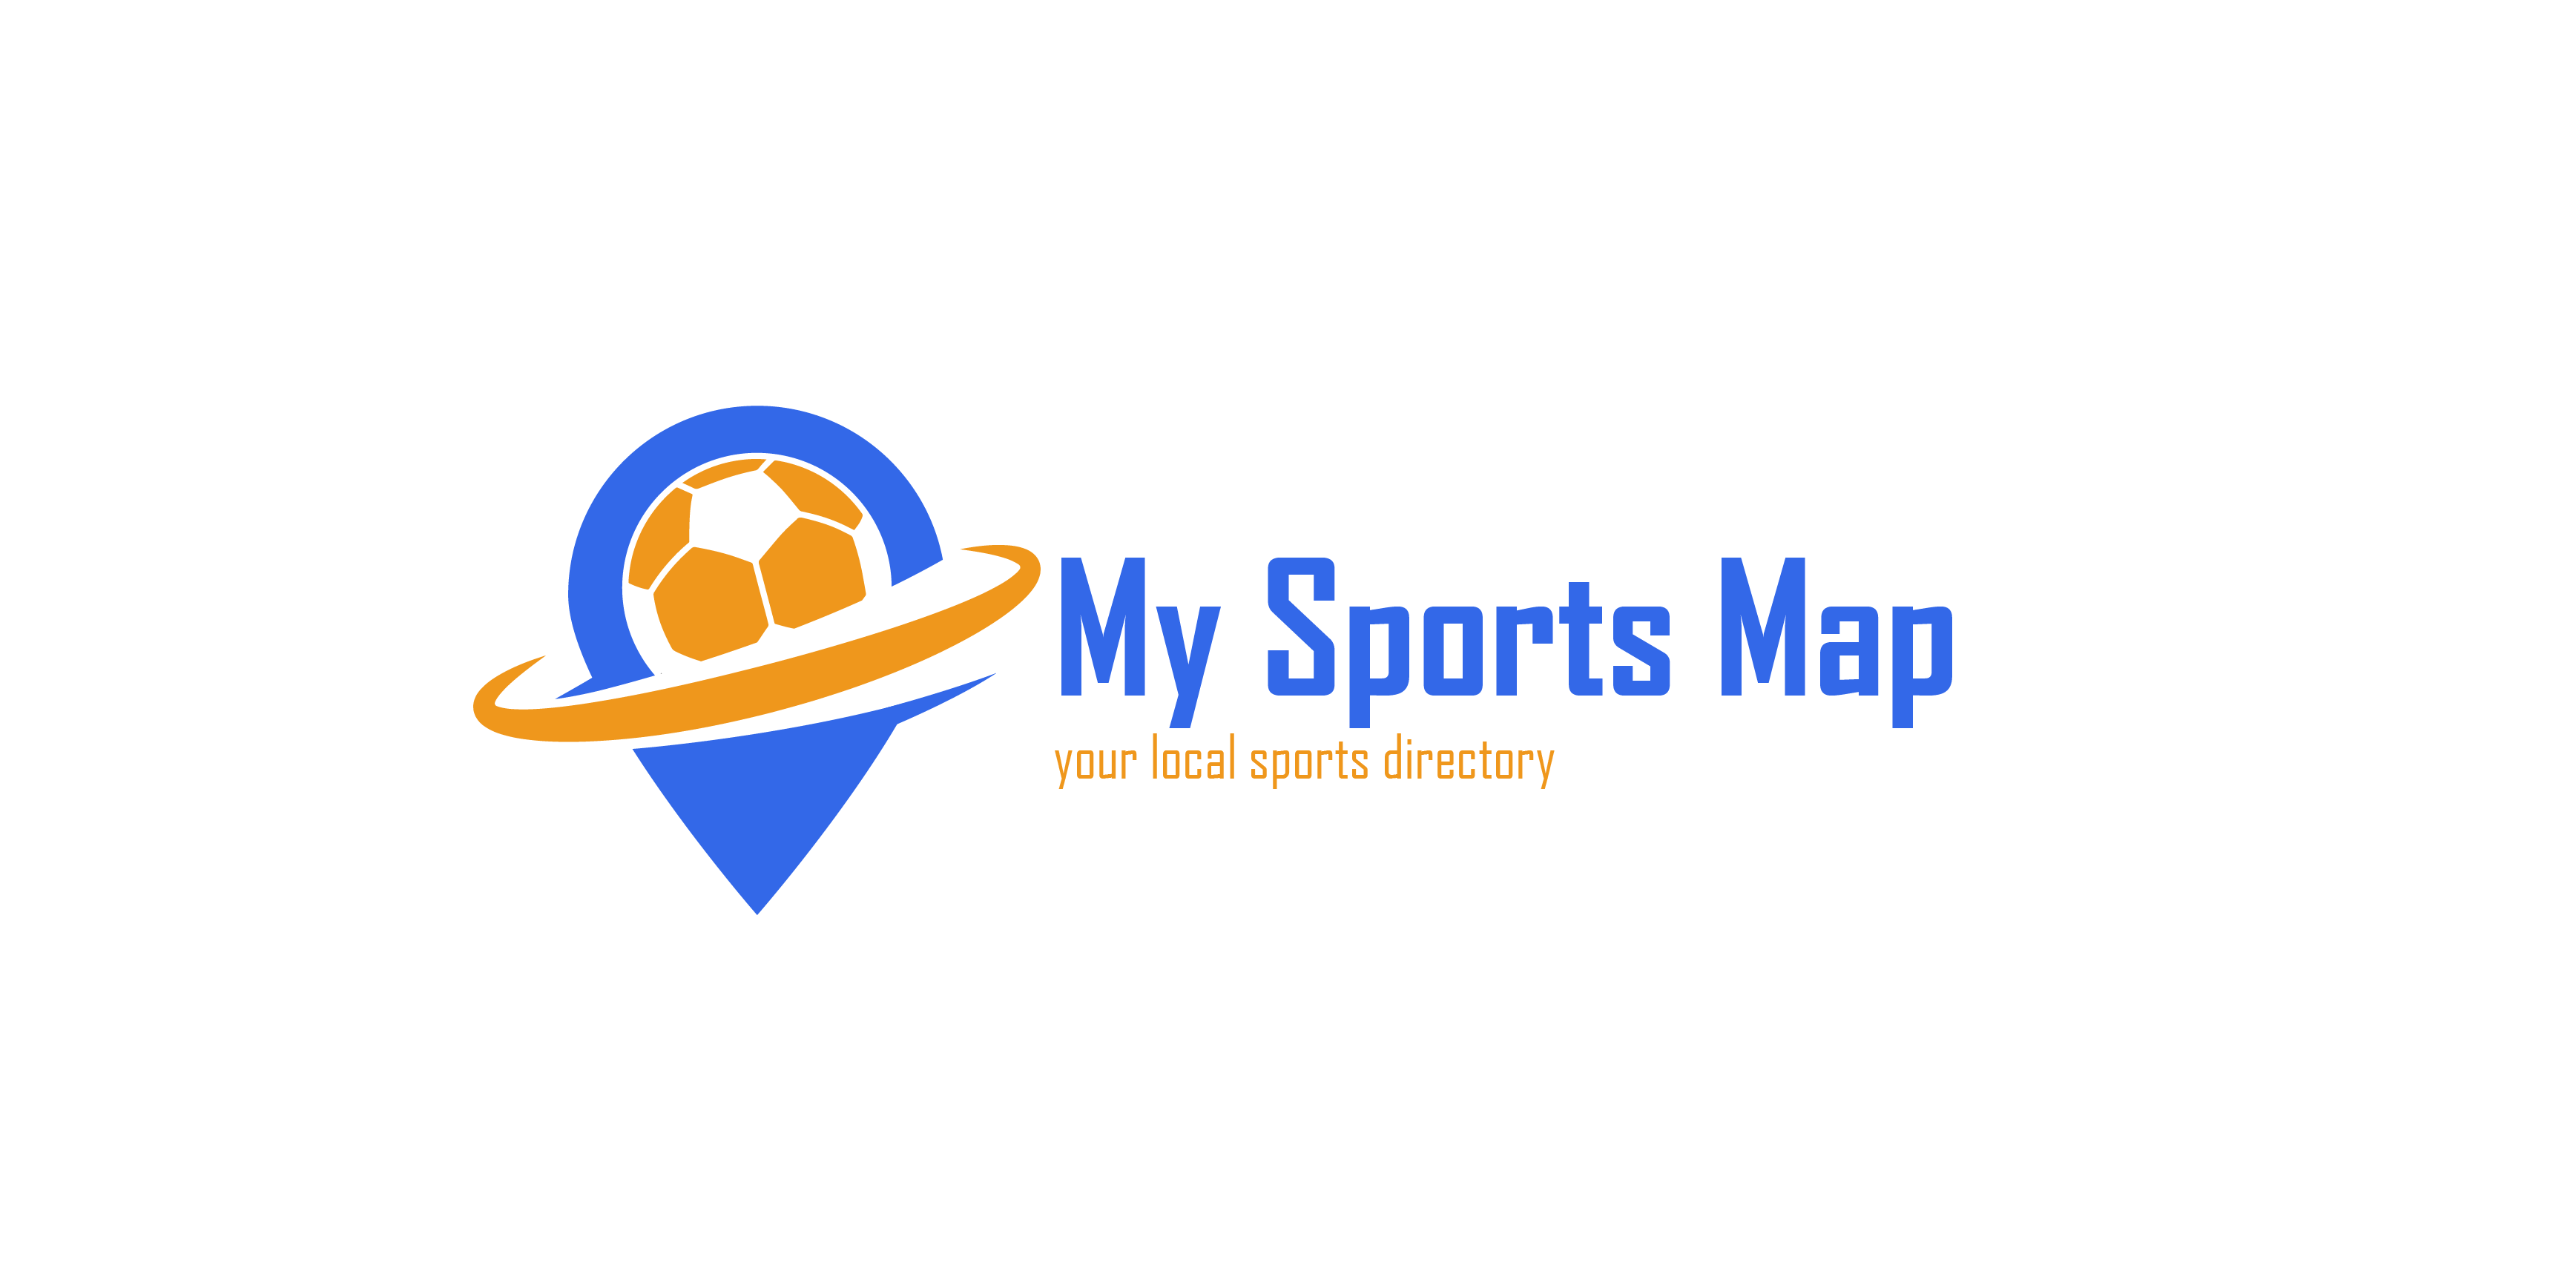 Logo of My Sports Map Business Directory In Manchester, Lancashire